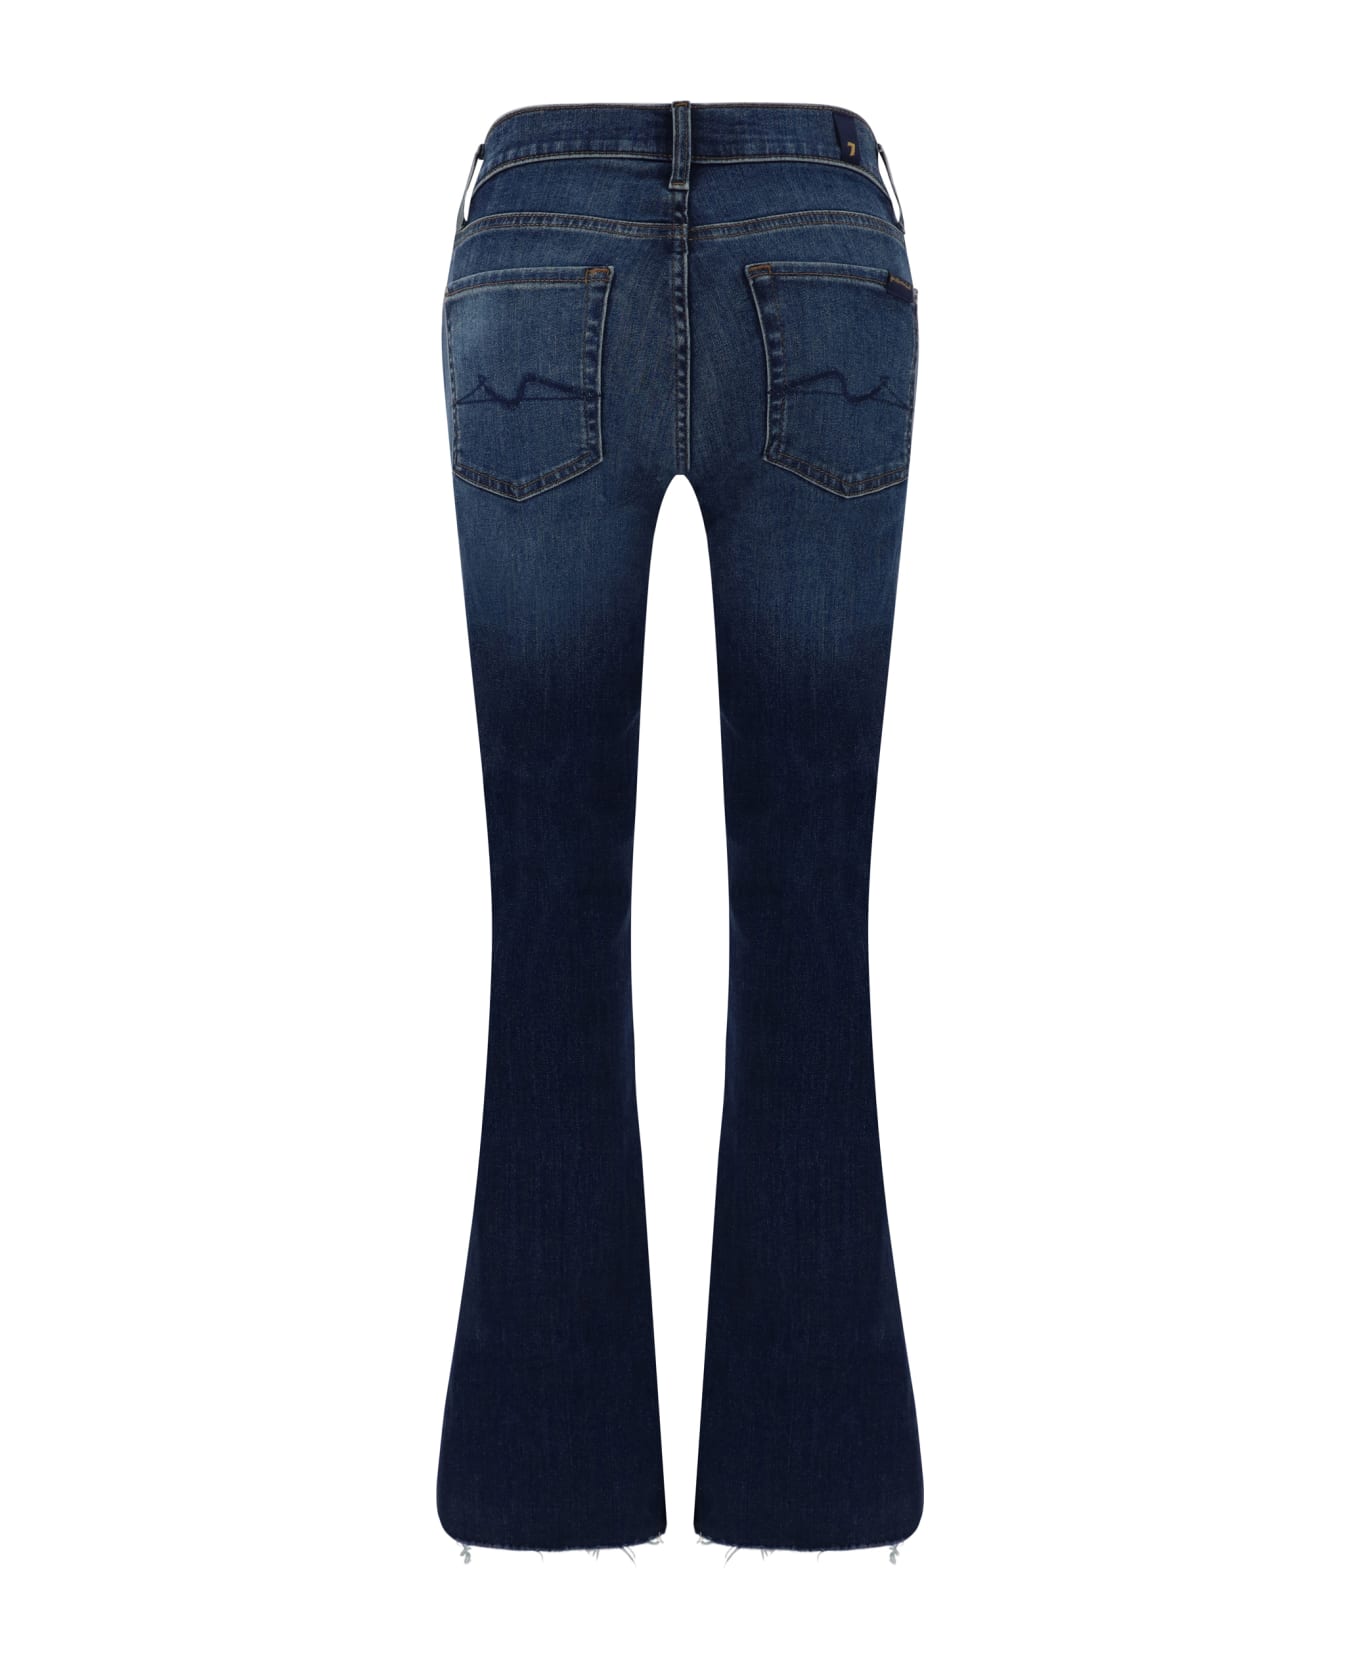 7 For All Mankind Jeans - Dark Blue デニム